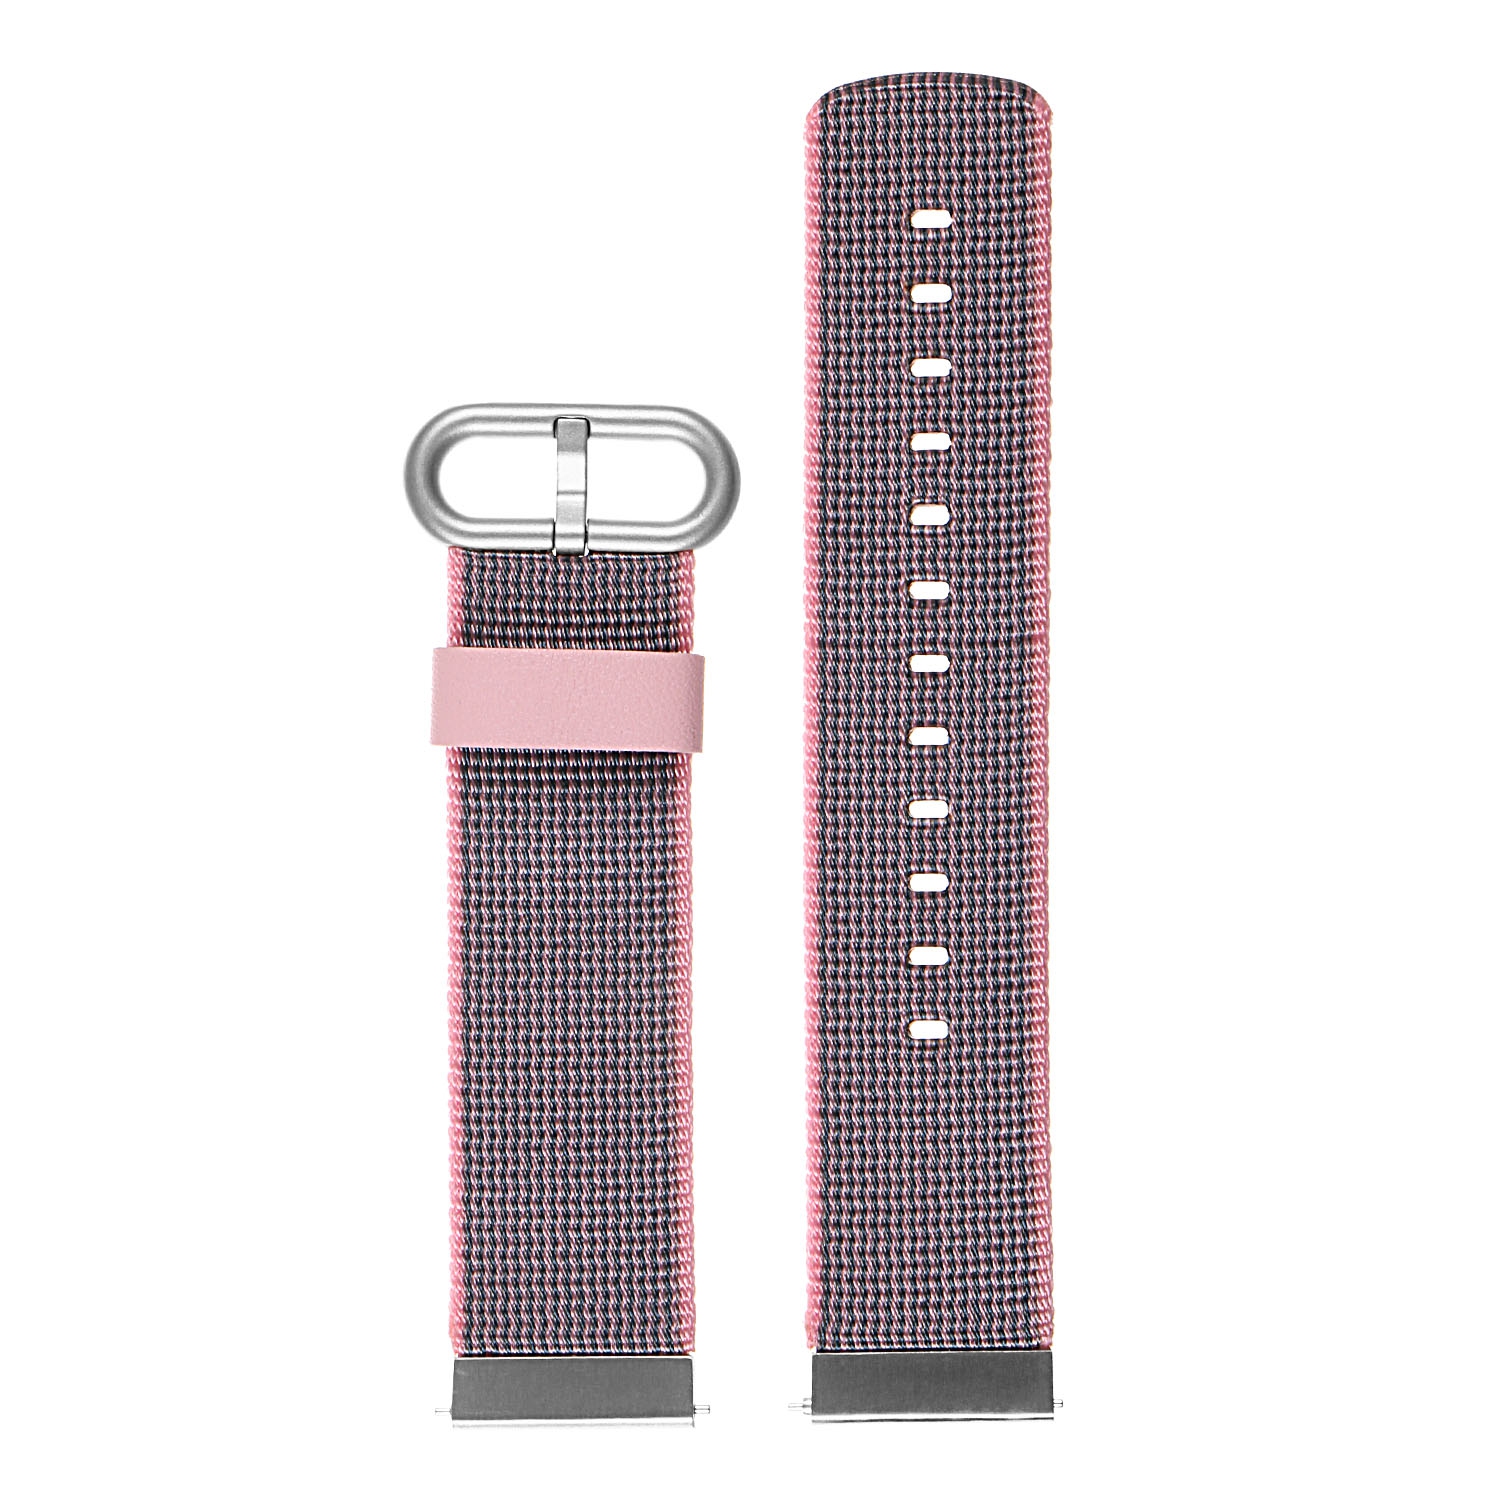 StrapsCo Ballistic Woven Nylon Replacement Watch Band Strap for Samsung Gear S2 Classic - Pink